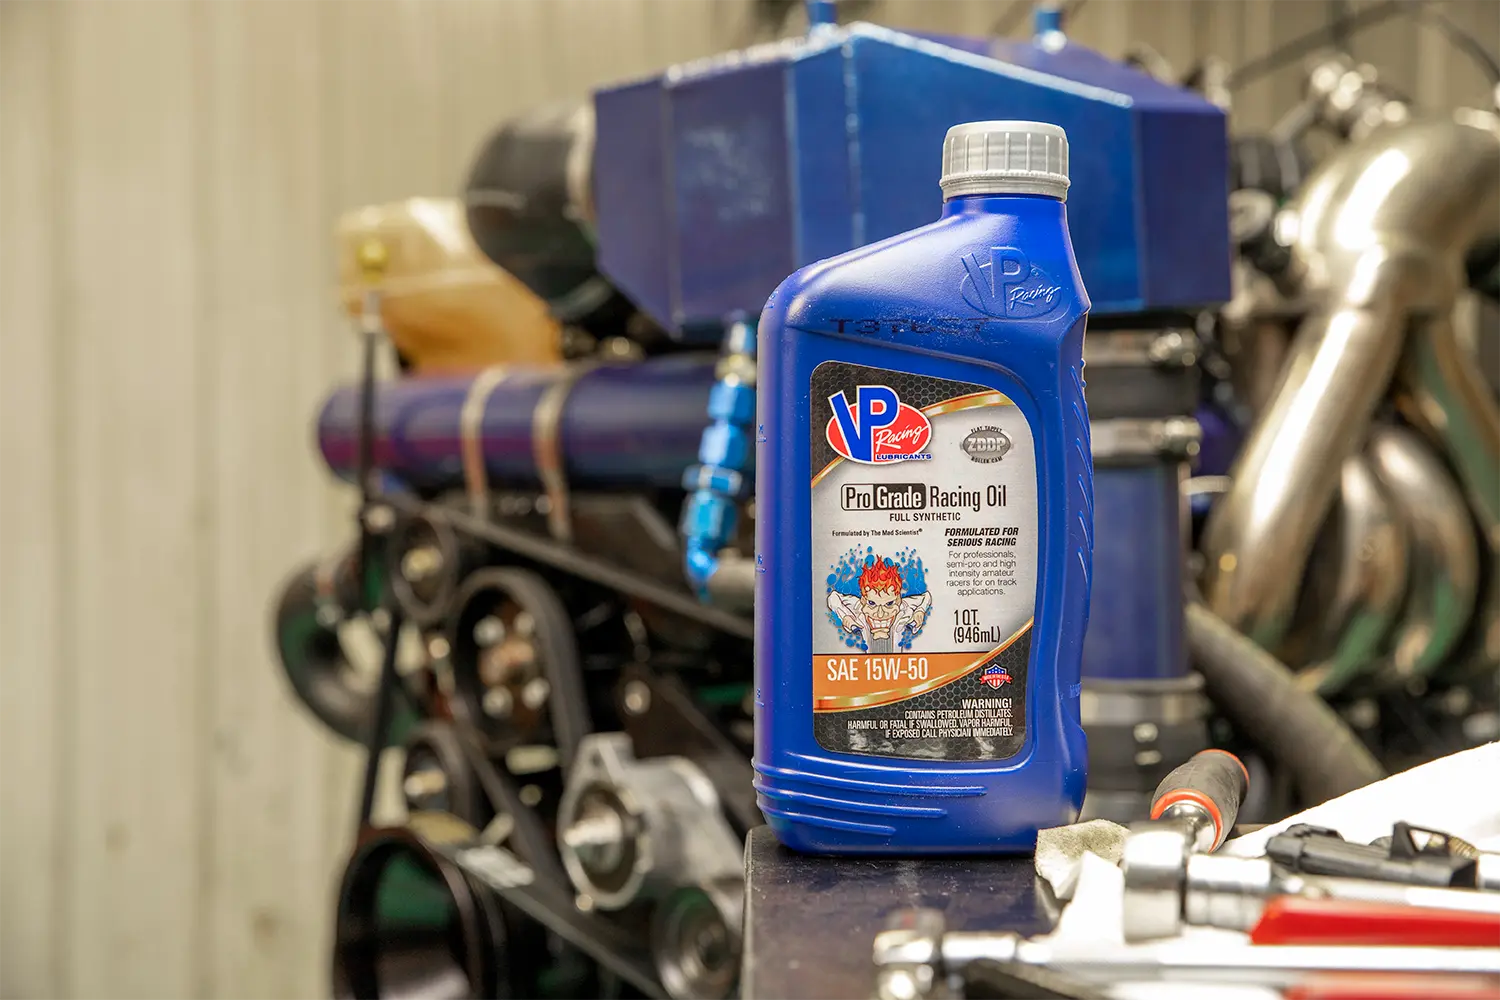 Quart of VP Racing Pro Grade engine oil. The head engine builder at Joe Gibbs Engines, Mark Cronquist, says it's the best racing oil, and he mandates its use in all off-road engines he builds.